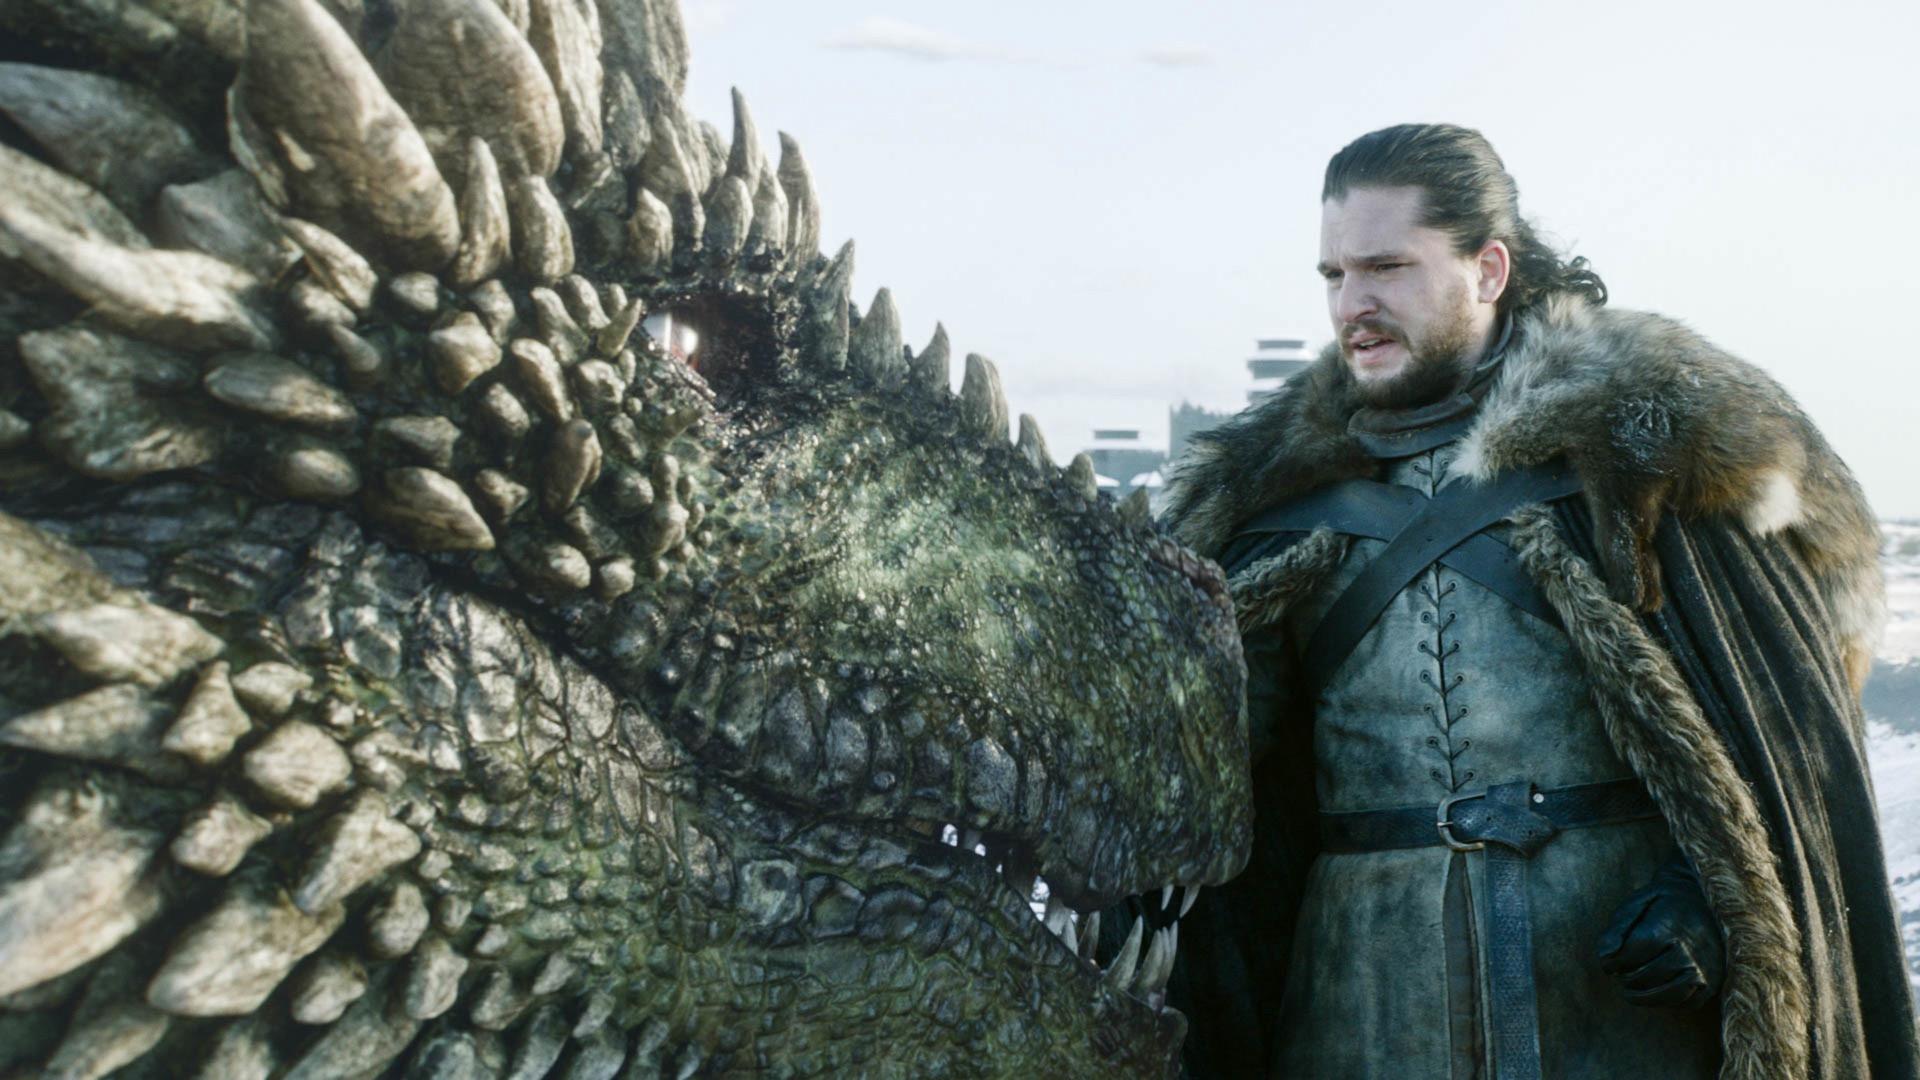 Jon Snow: The Lost Dragon – Event Preview